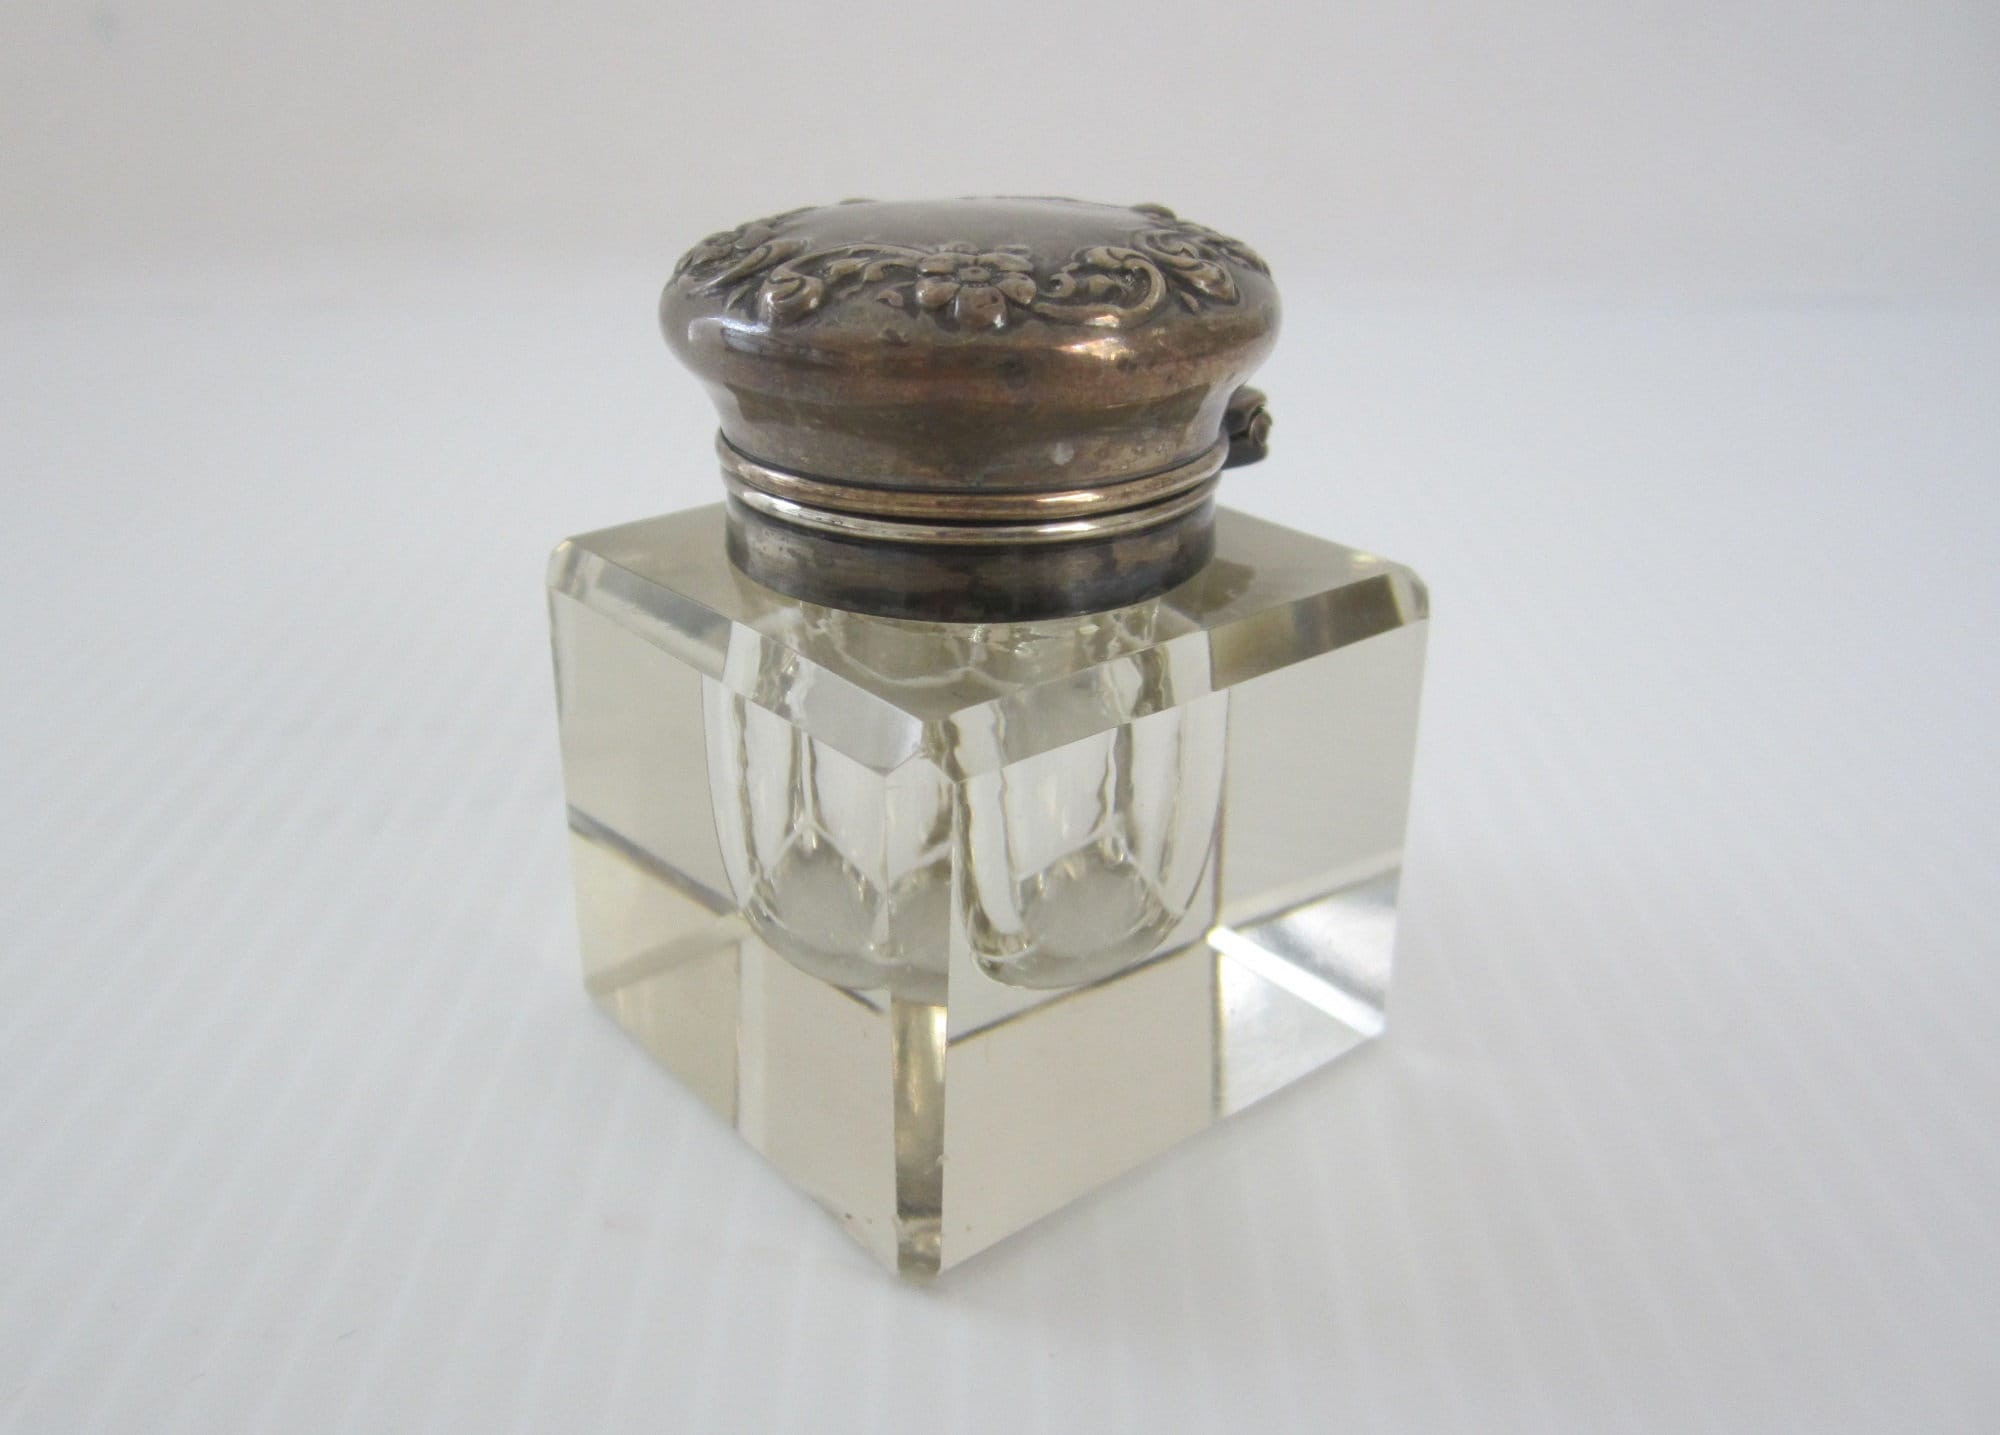 Triangular inkwell made of glass and pewter with a Lily Flower.